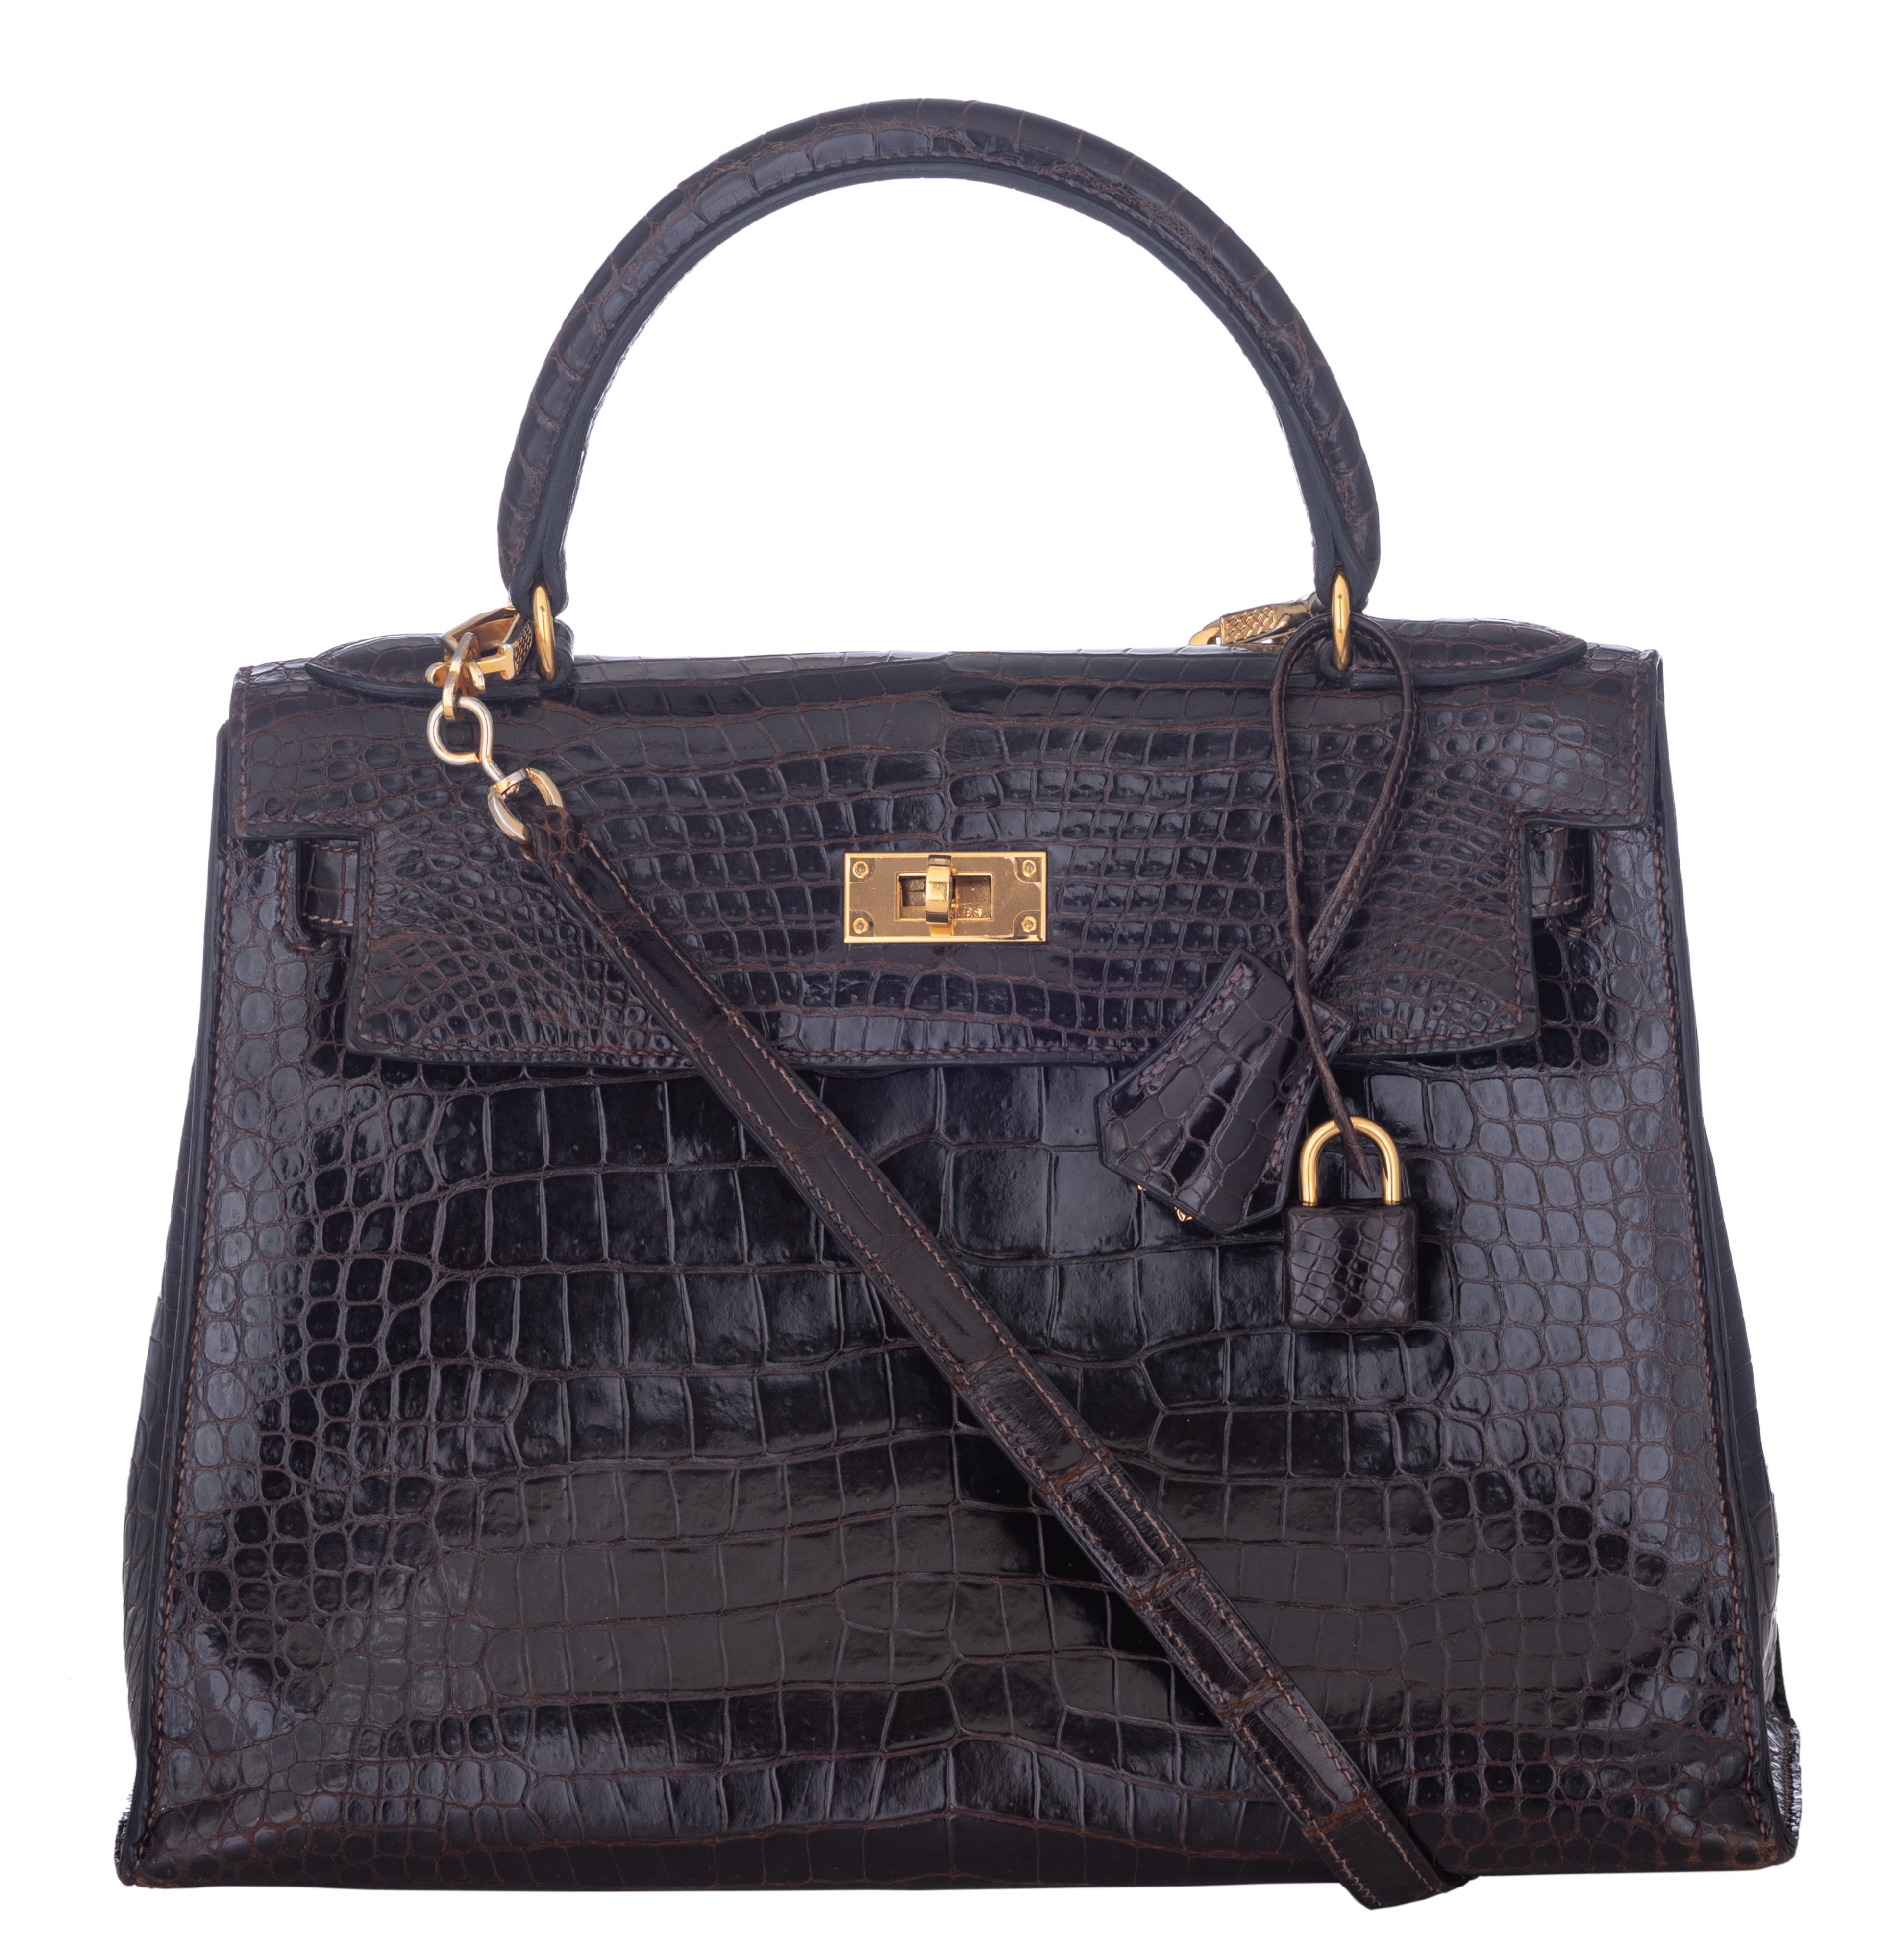 HERMÈS, Kelly Sellier 29 bag, Brown crocodile leather, with gilt metal hardware, Vintage about 1975